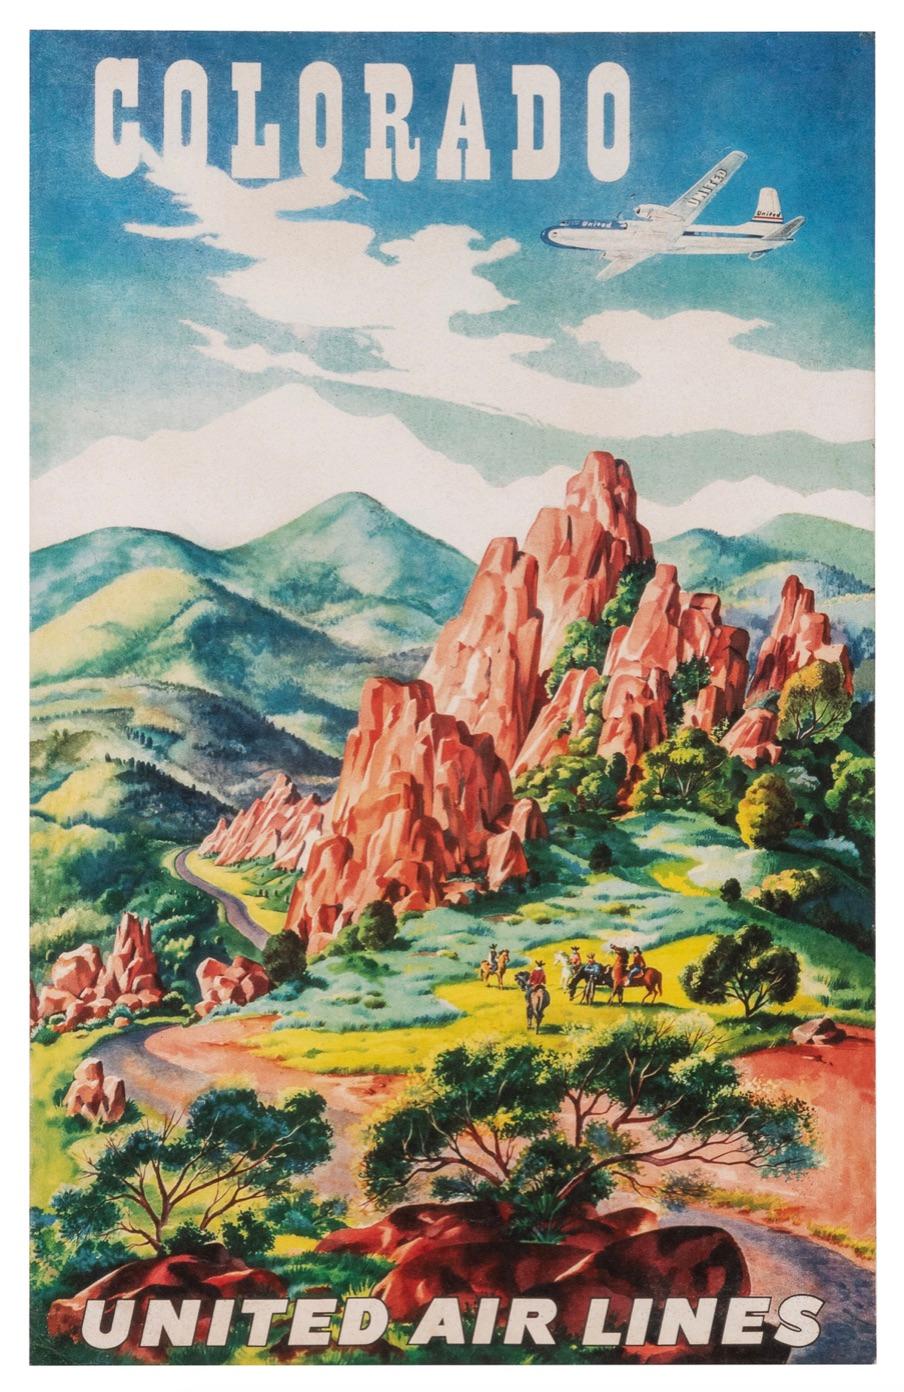 Offered is a vintage travel poster for United Airlines from the 1950s. This advertisement poster shows Colorado as one of United Airlines' alluring travel destinations. The design features a scene of Garden of the Gods park in Colorado Springs. The